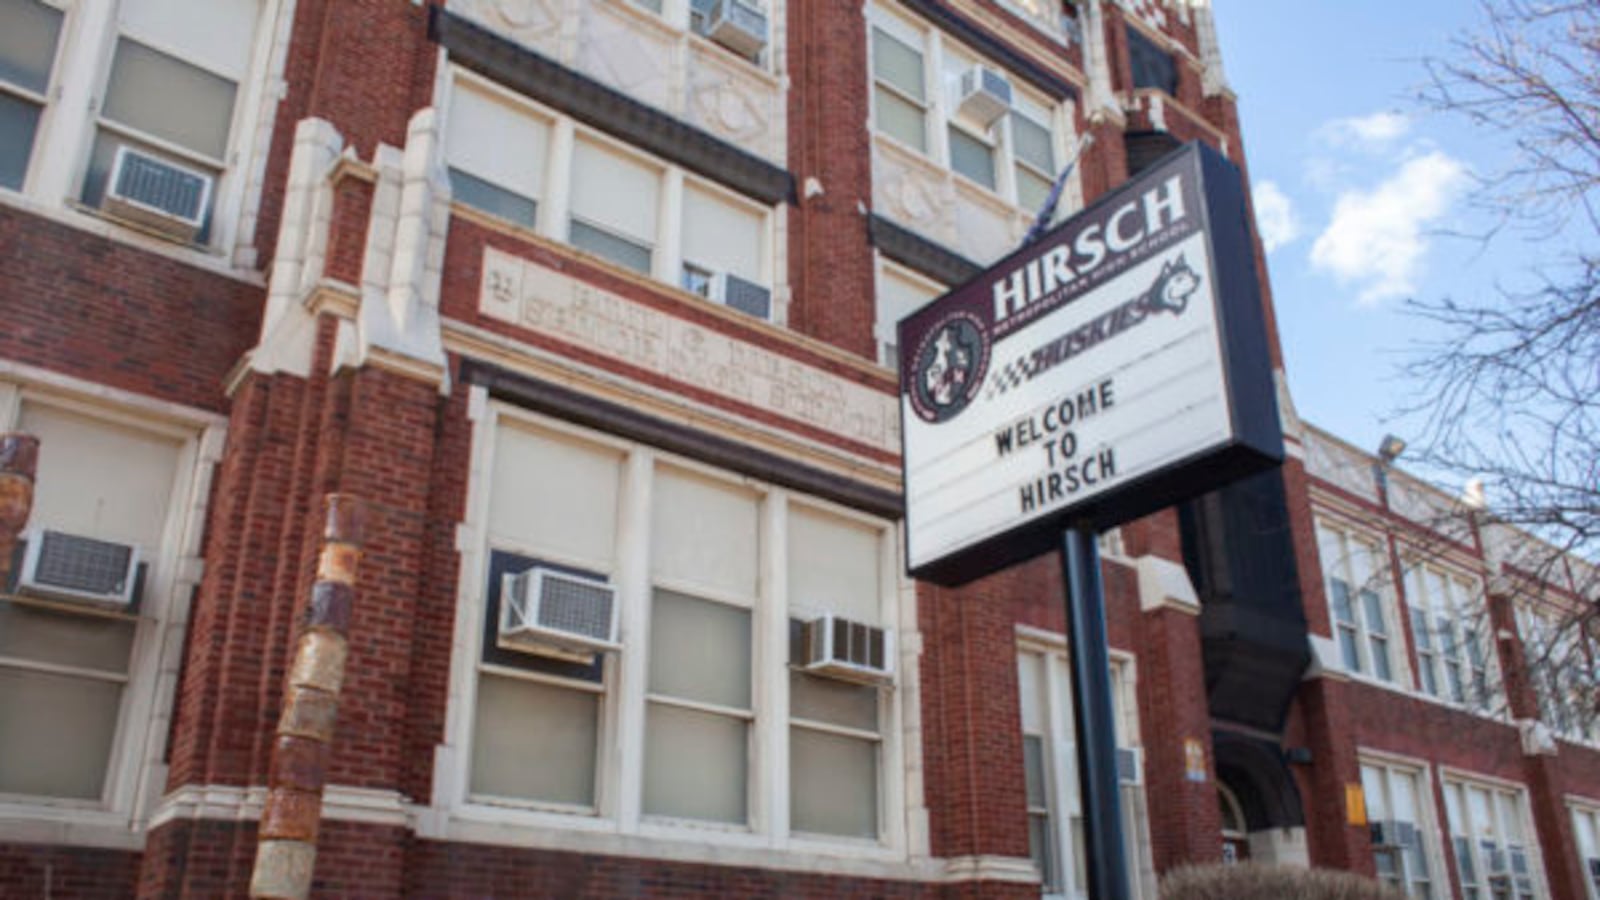 A sign in front of a school facade says “Welcome to Hirsch.” 